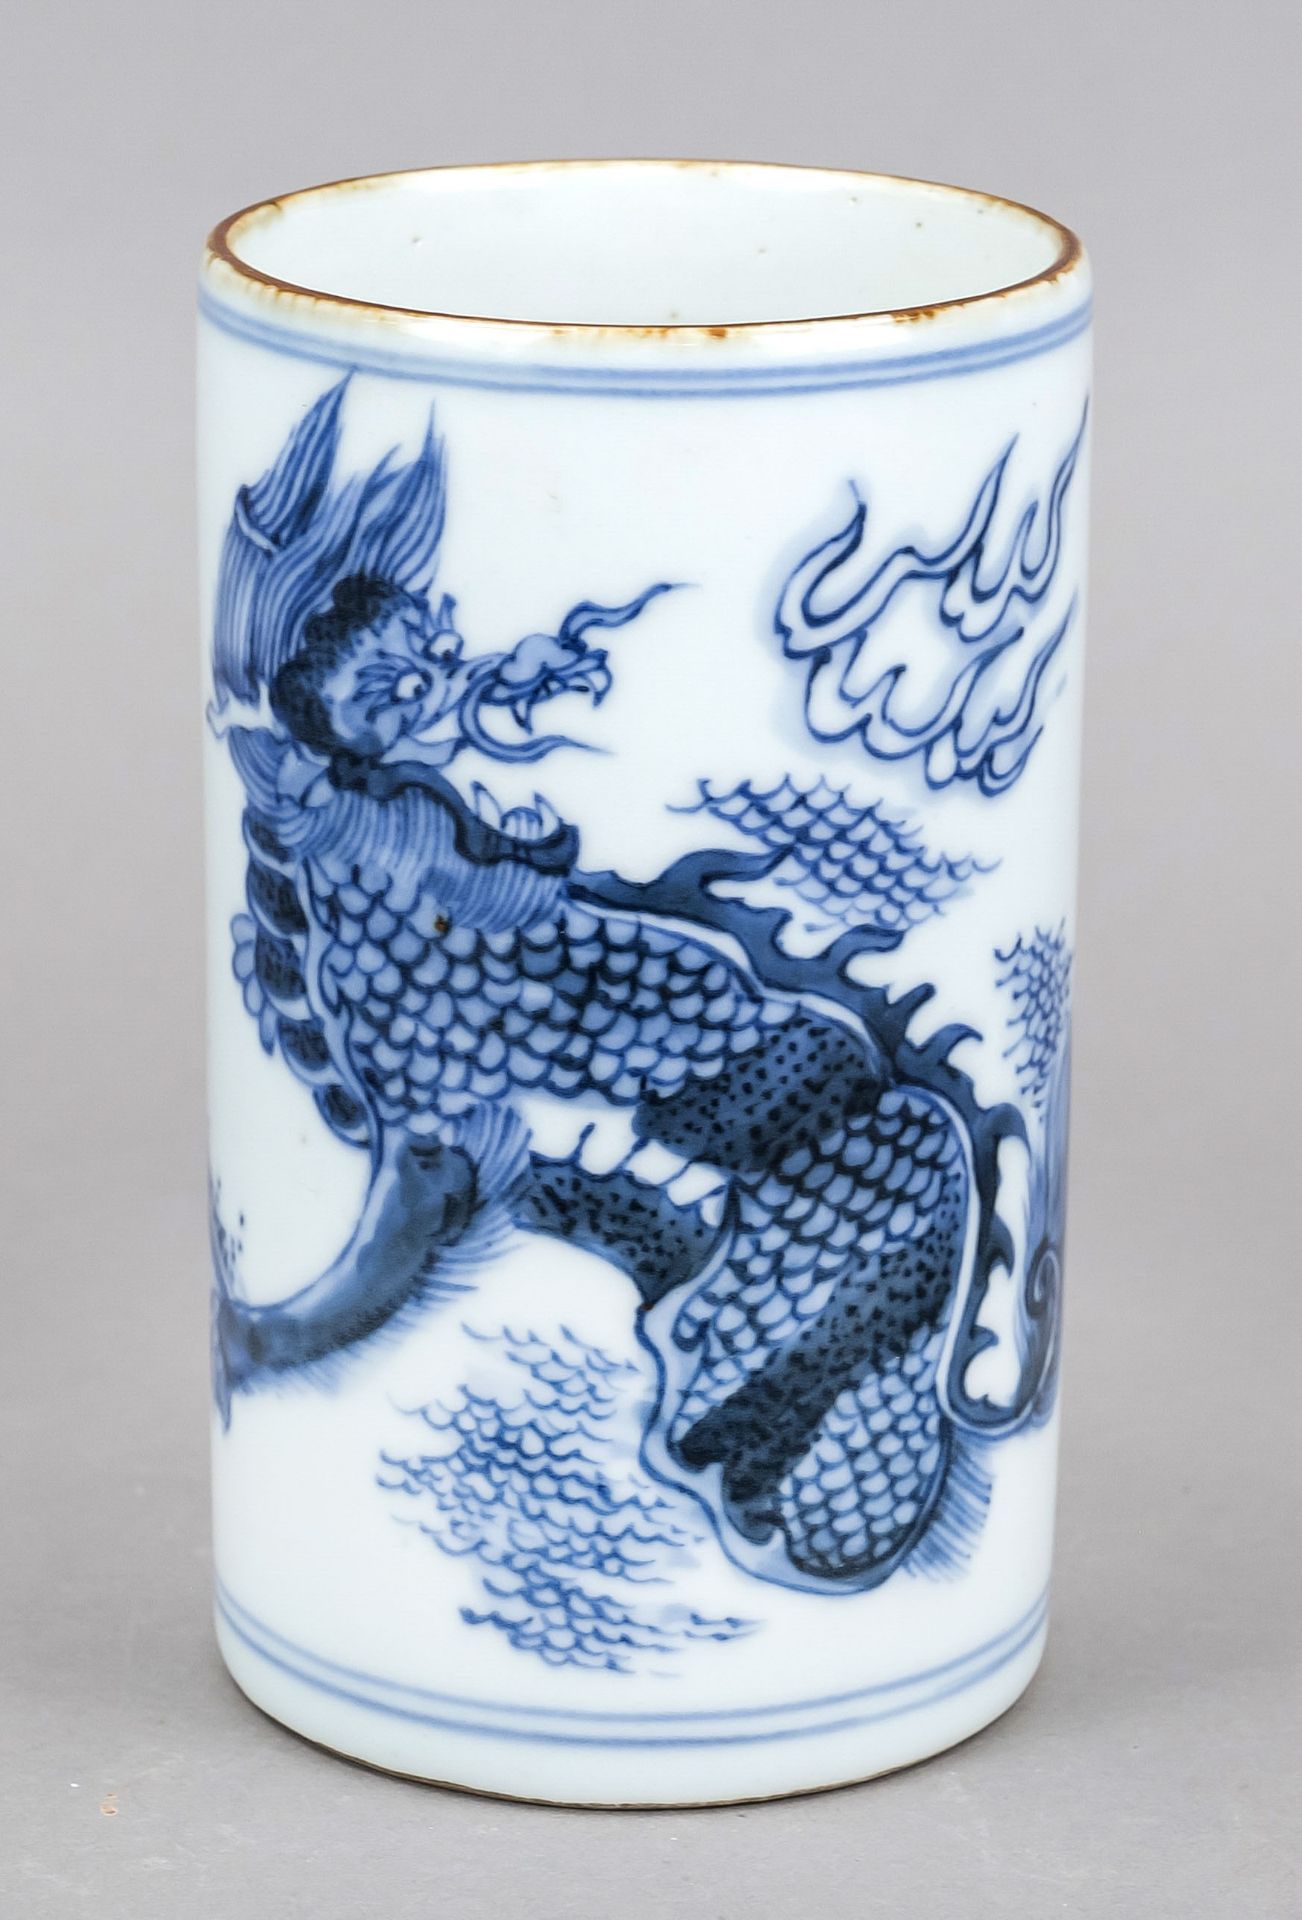 Kangxi style brush cup (Bitong), China. Revolving decoration in cobalt blue with quilin/dragon in